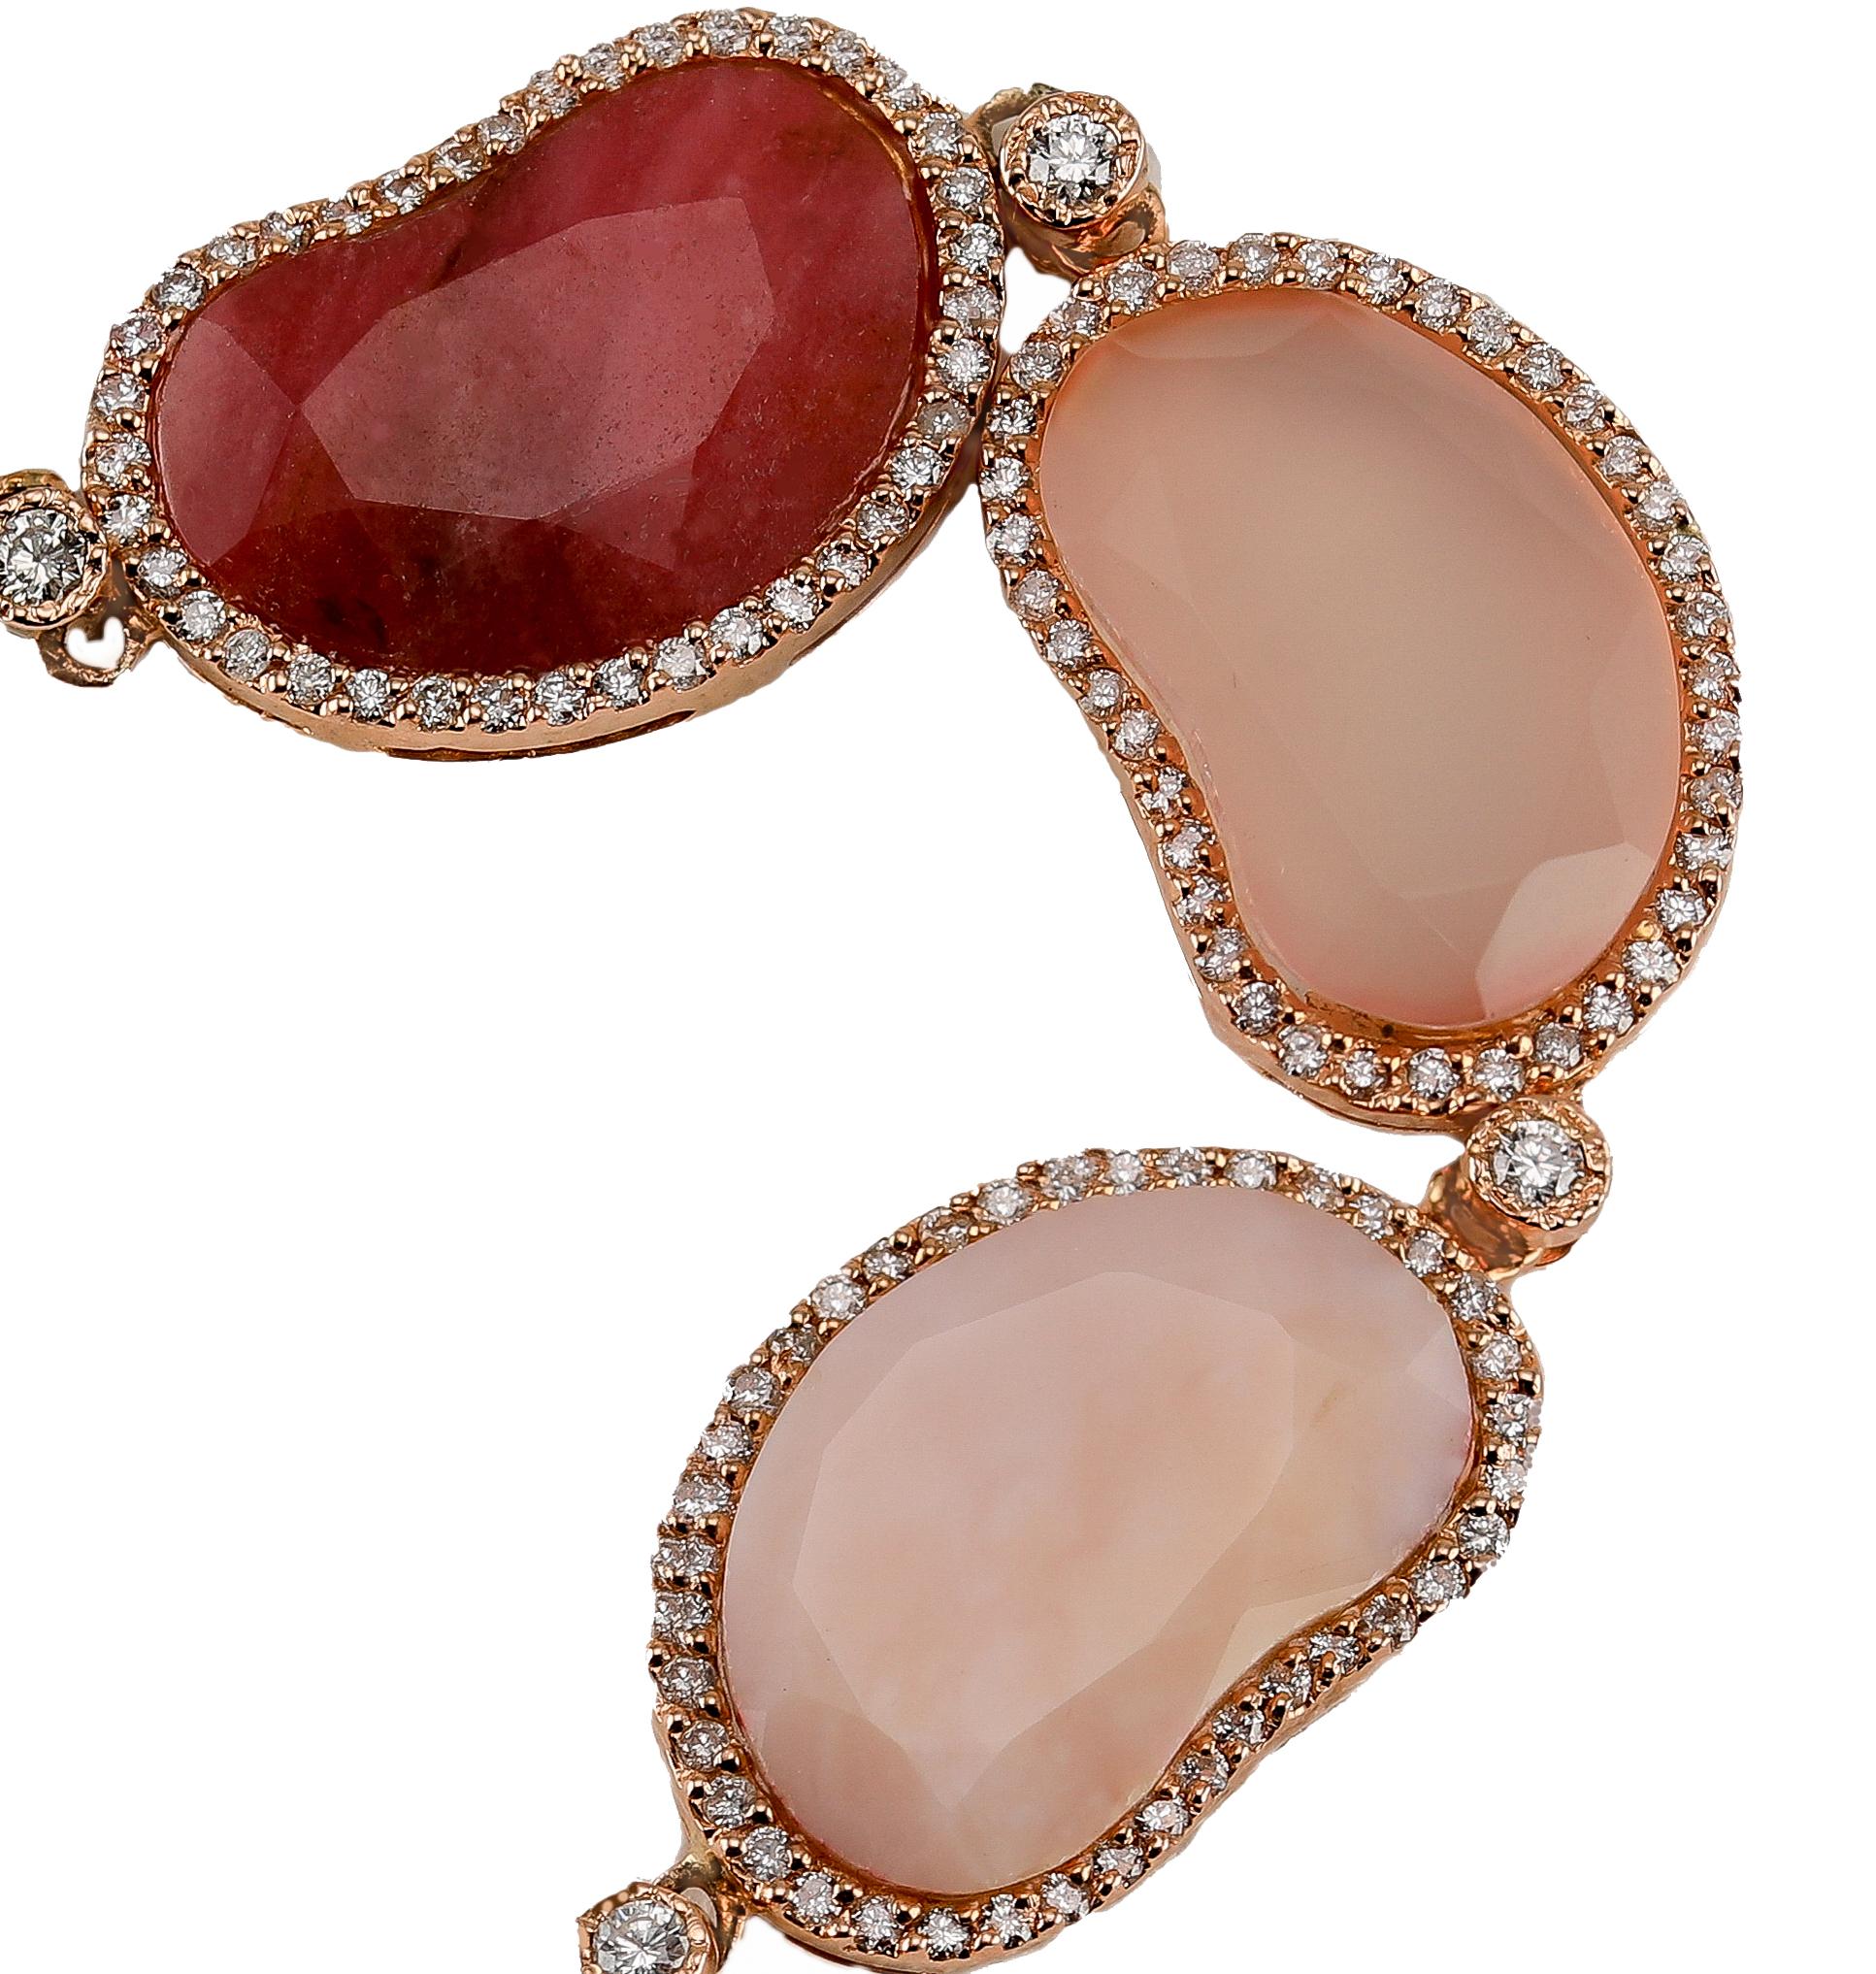 14k Rose Gold Sliced Pink Agate Ruby Rose Quartz Pink Bean Diamond Bracelet

A beautiful bracelet consisting seven sliced cut stones, of rose quartz, ruby, and agate. each stone is shaped like a bean and highlighted with a halo of diamonds totaling